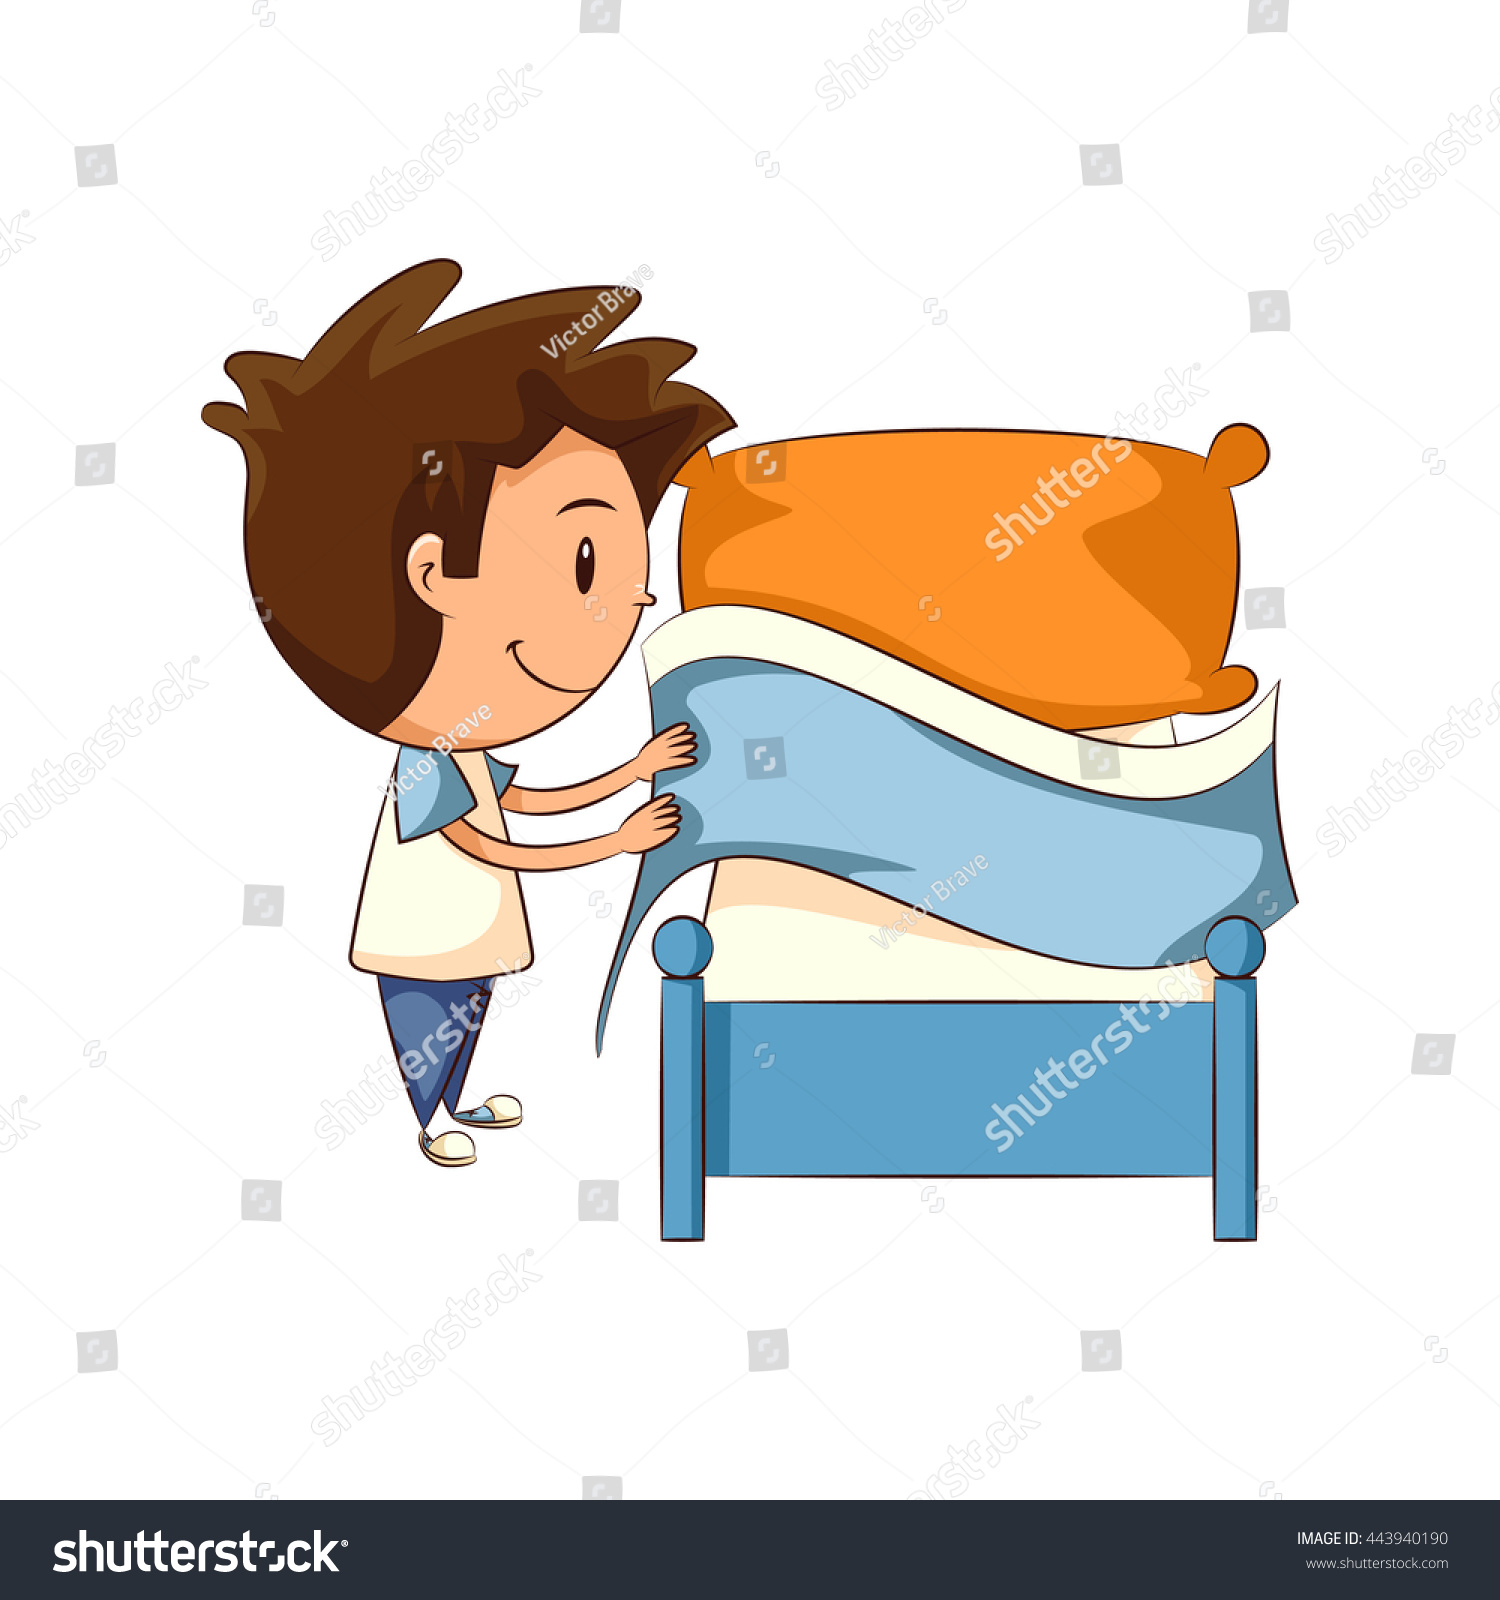 girl making bed clipart - photo #4